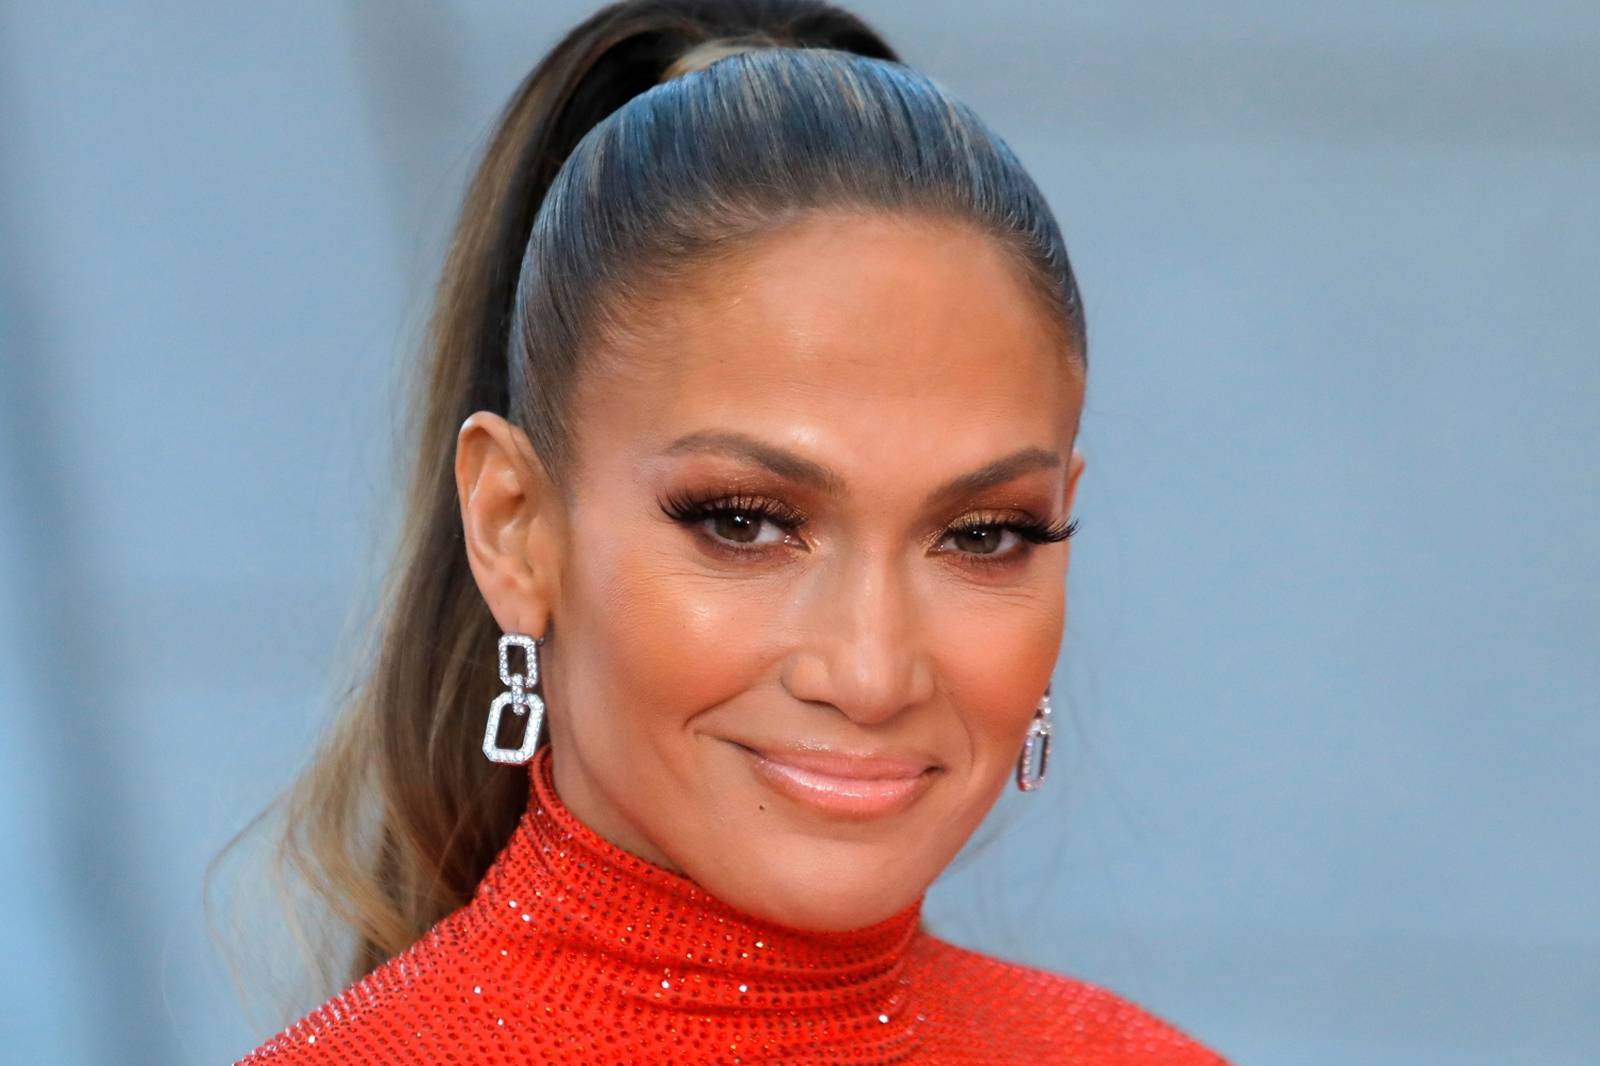 Actress and singer Jennifer Lopez attends the 2019 CFDA Awards where she will be receiving the Fashion Icon Award at The Brooklyn Museum in New York